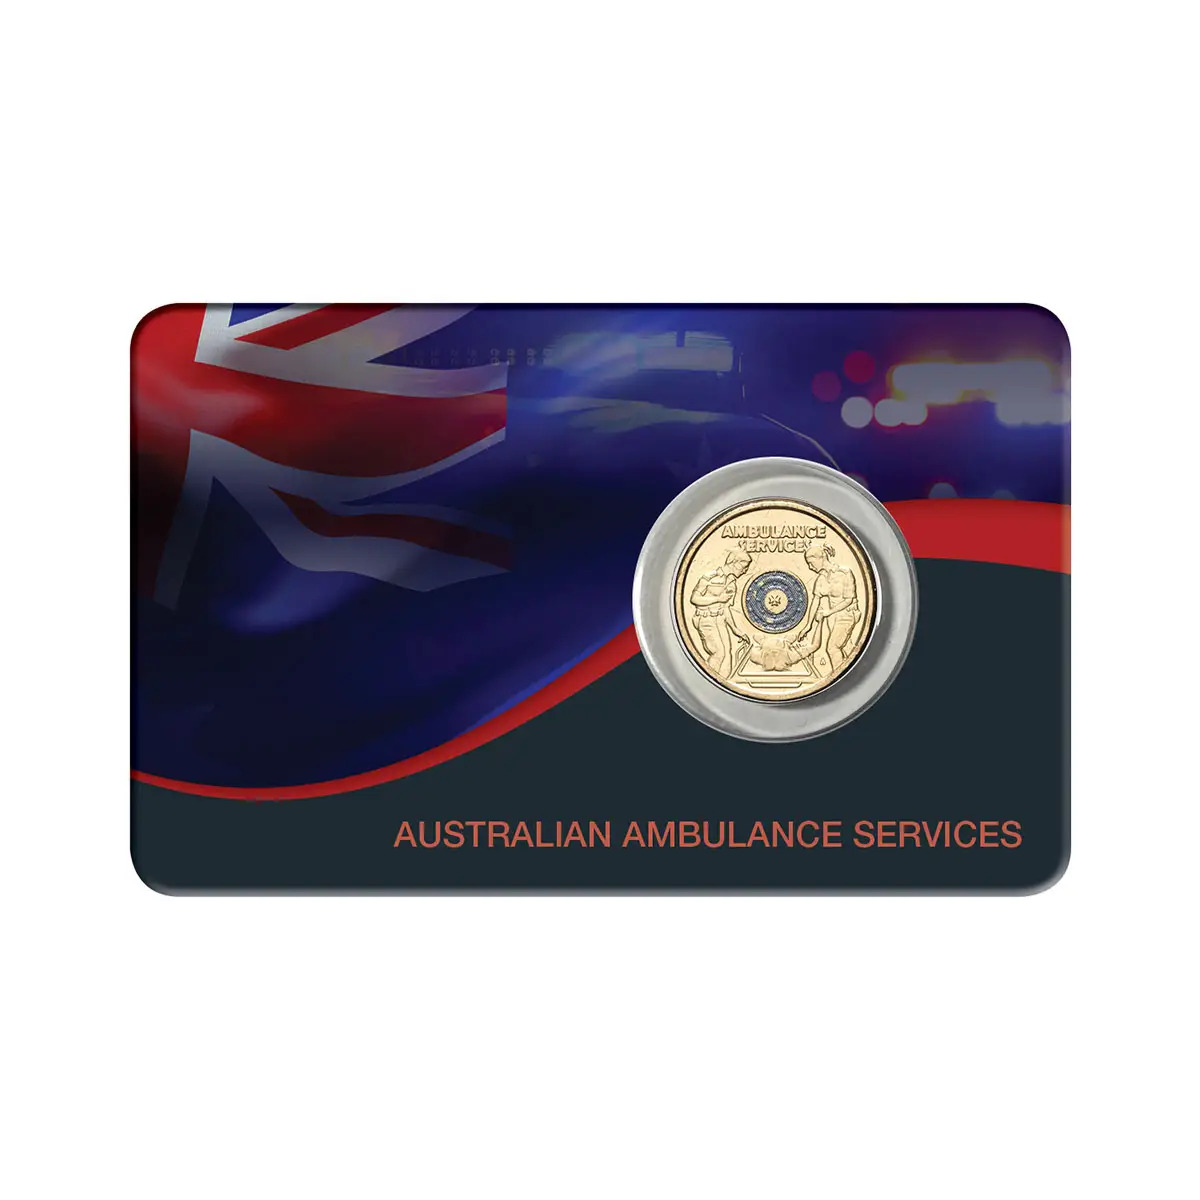 2021 $2 Australian Ambulance Services Coin Pack